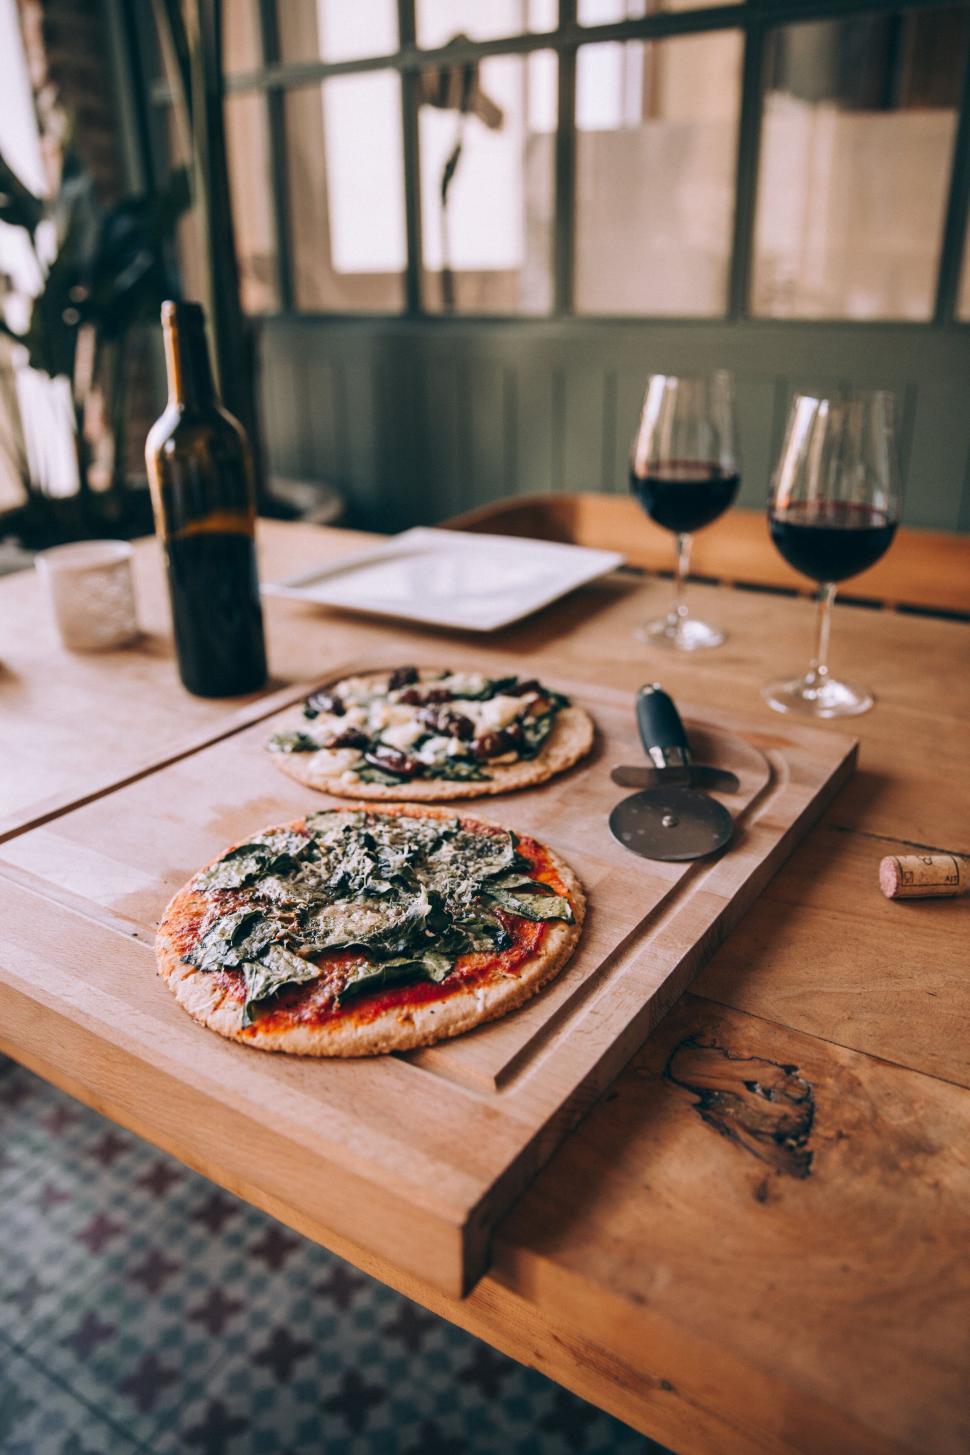 Free Image of Rustic pizza and wine on wooden table 